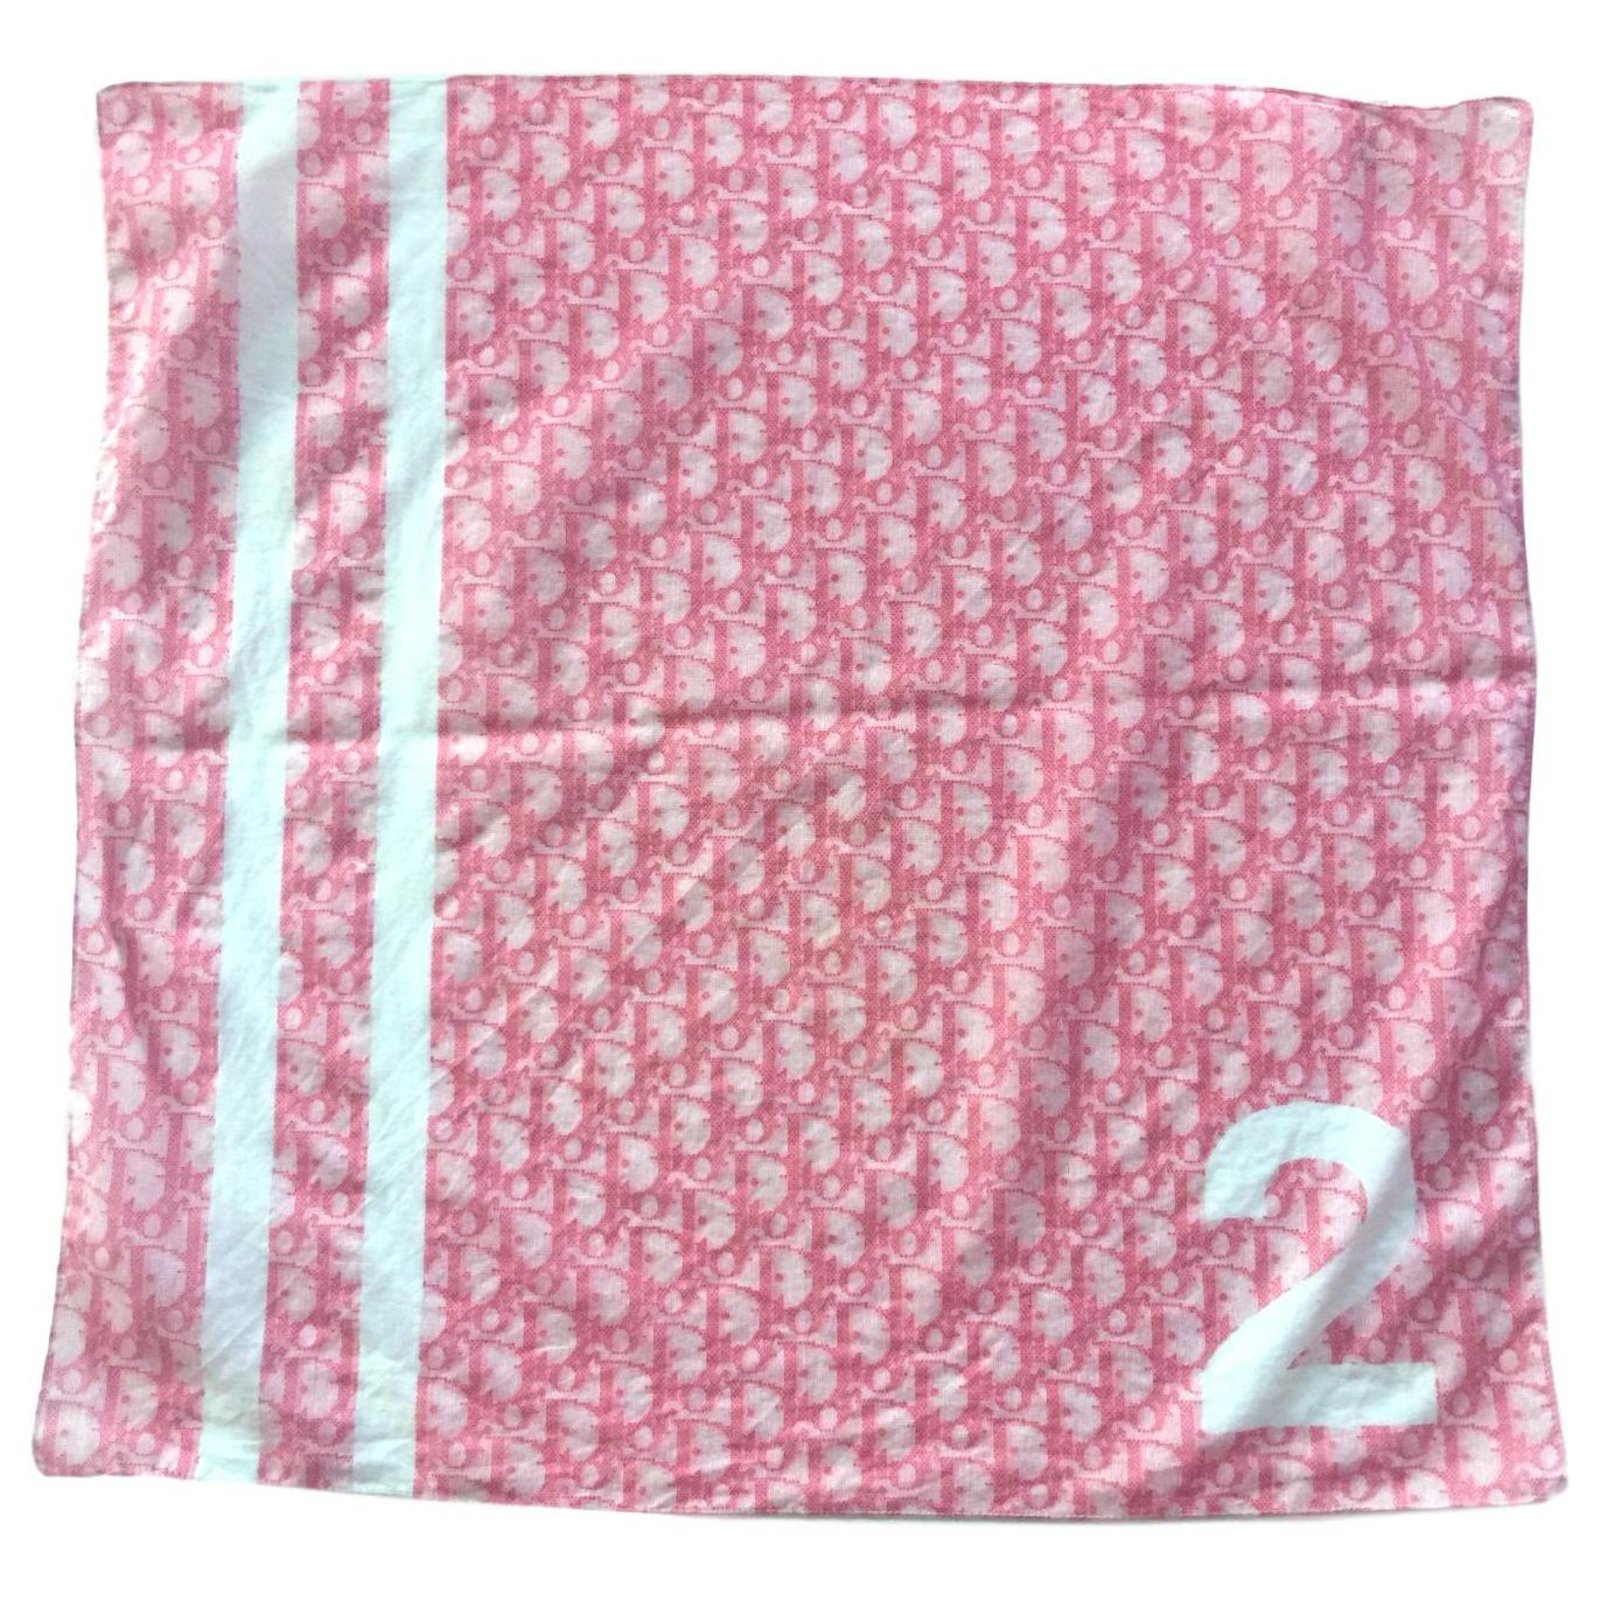 Dior Oblique Shawl Indy Pink Wool Silk and Cashmere  DIOR